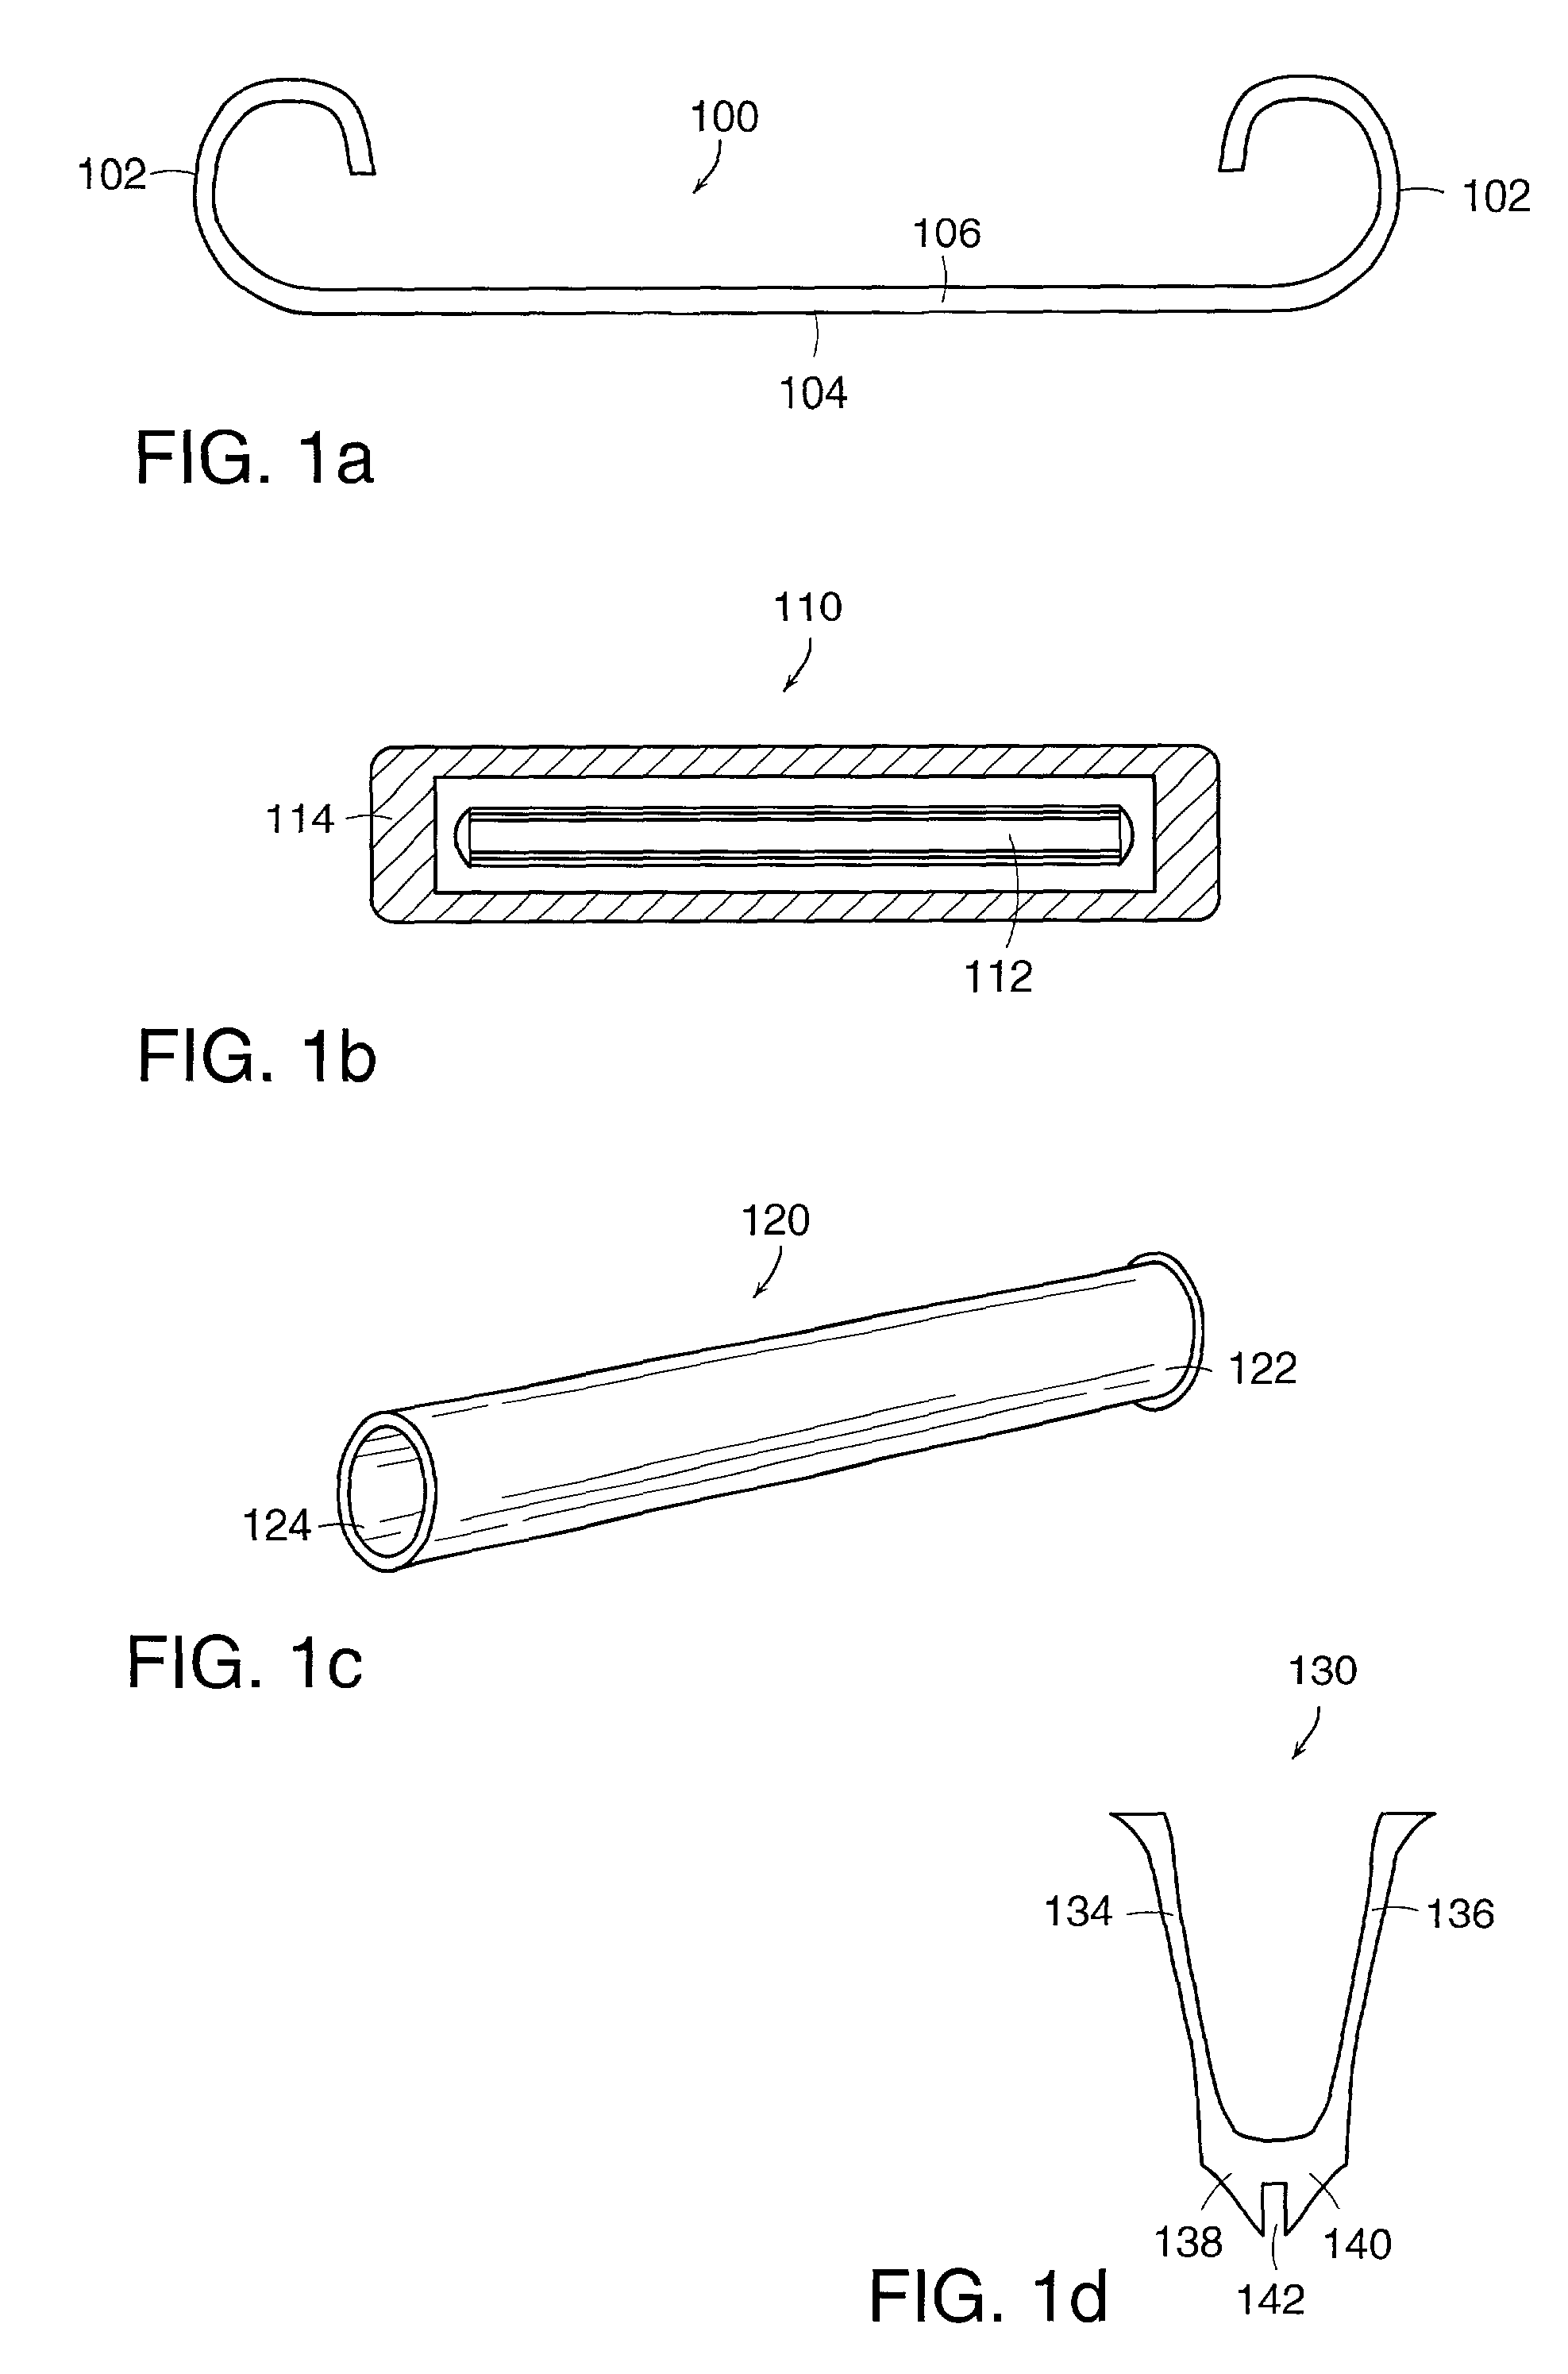 Controlling resorption of bioresorbable medical implant material